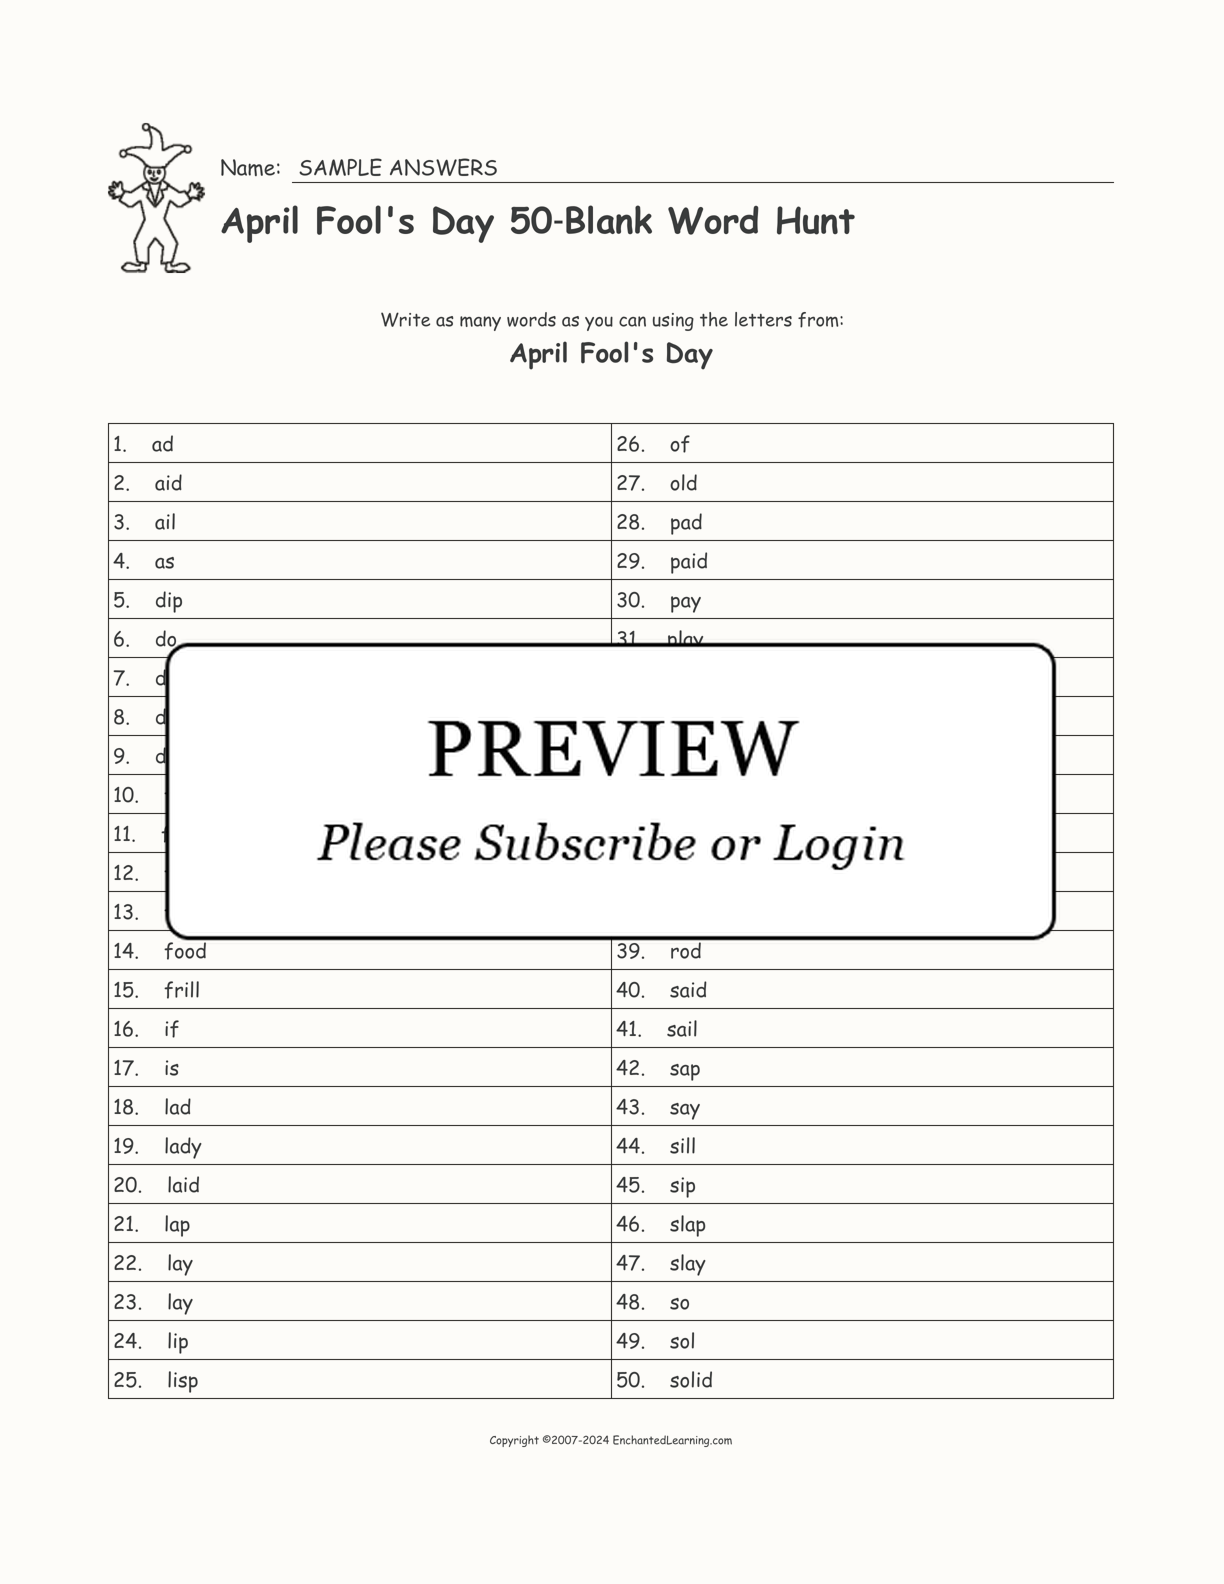 April Fool's Day 50‑Blank Word Hunt interactive worksheet page 2